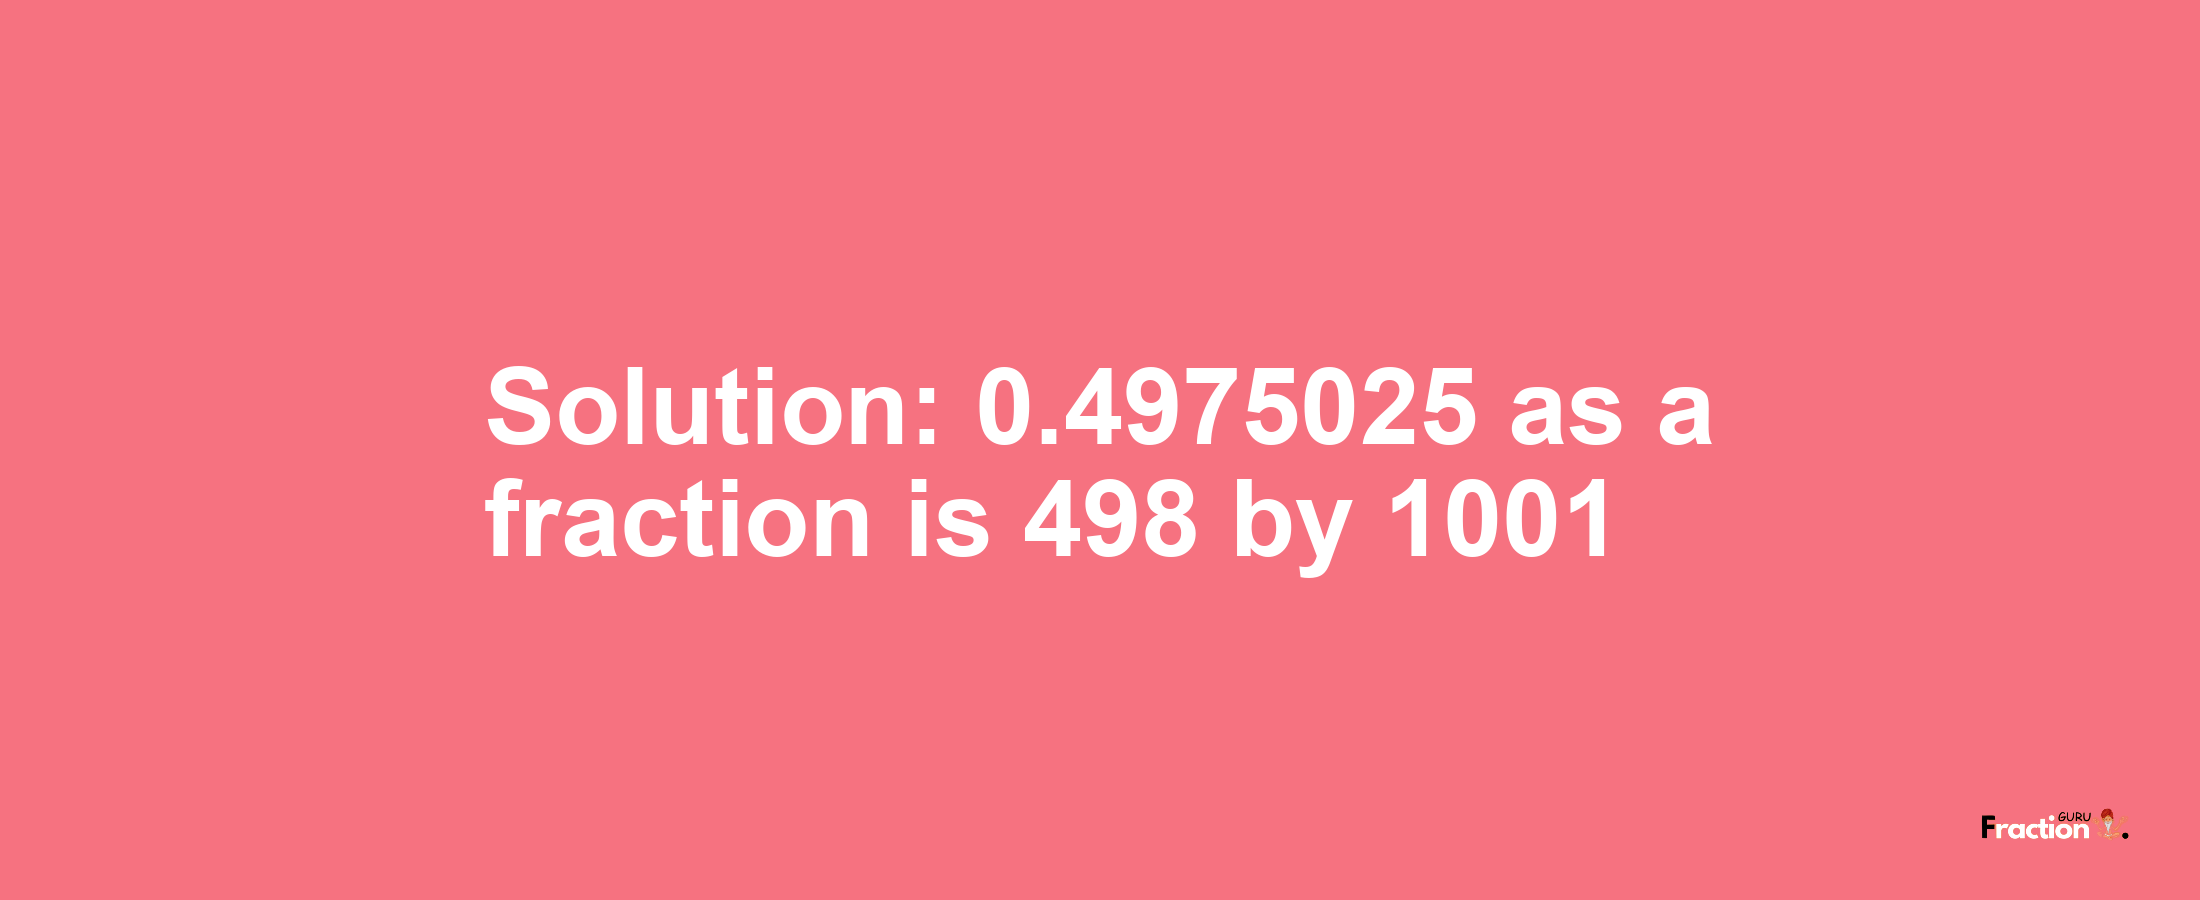 Solution:0.4975025 as a fraction is 498/1001